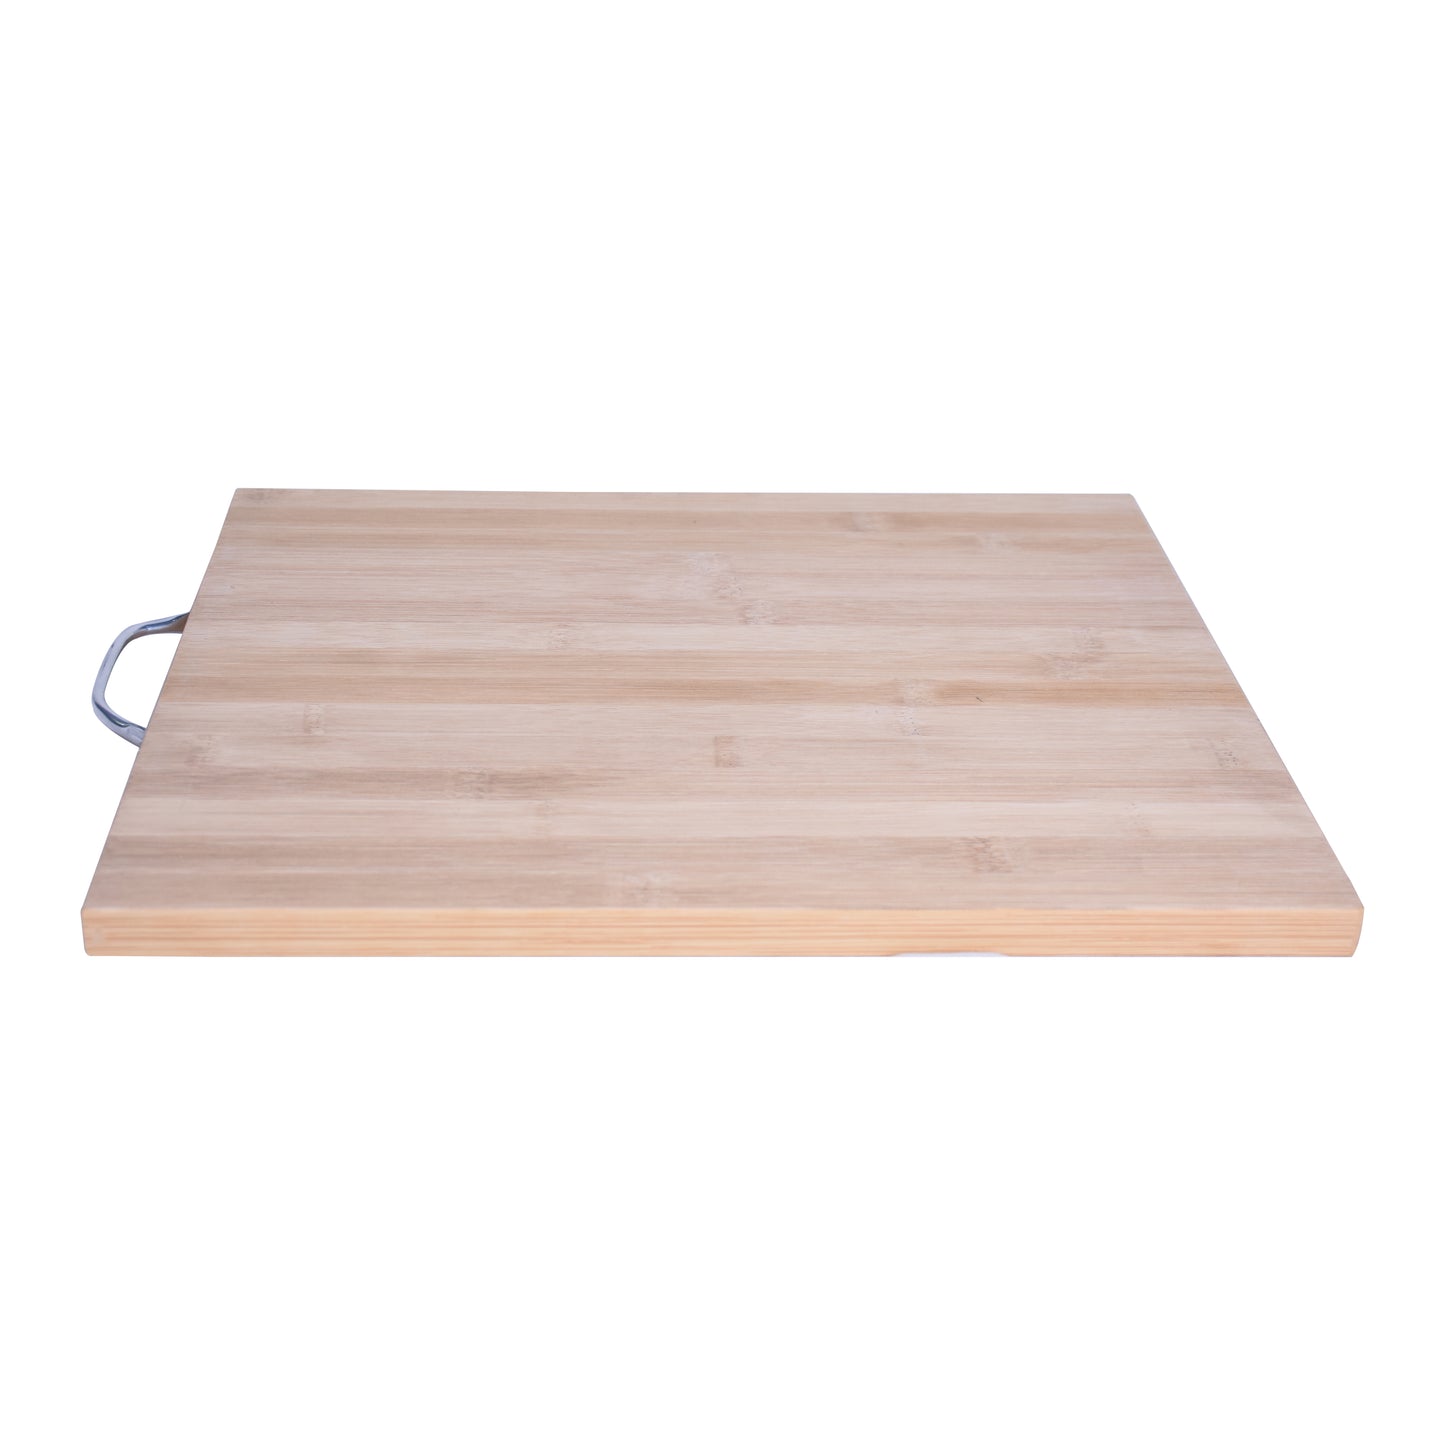 Vegetable Meat Wooden Cutting Chopping Board 29 x 20cm